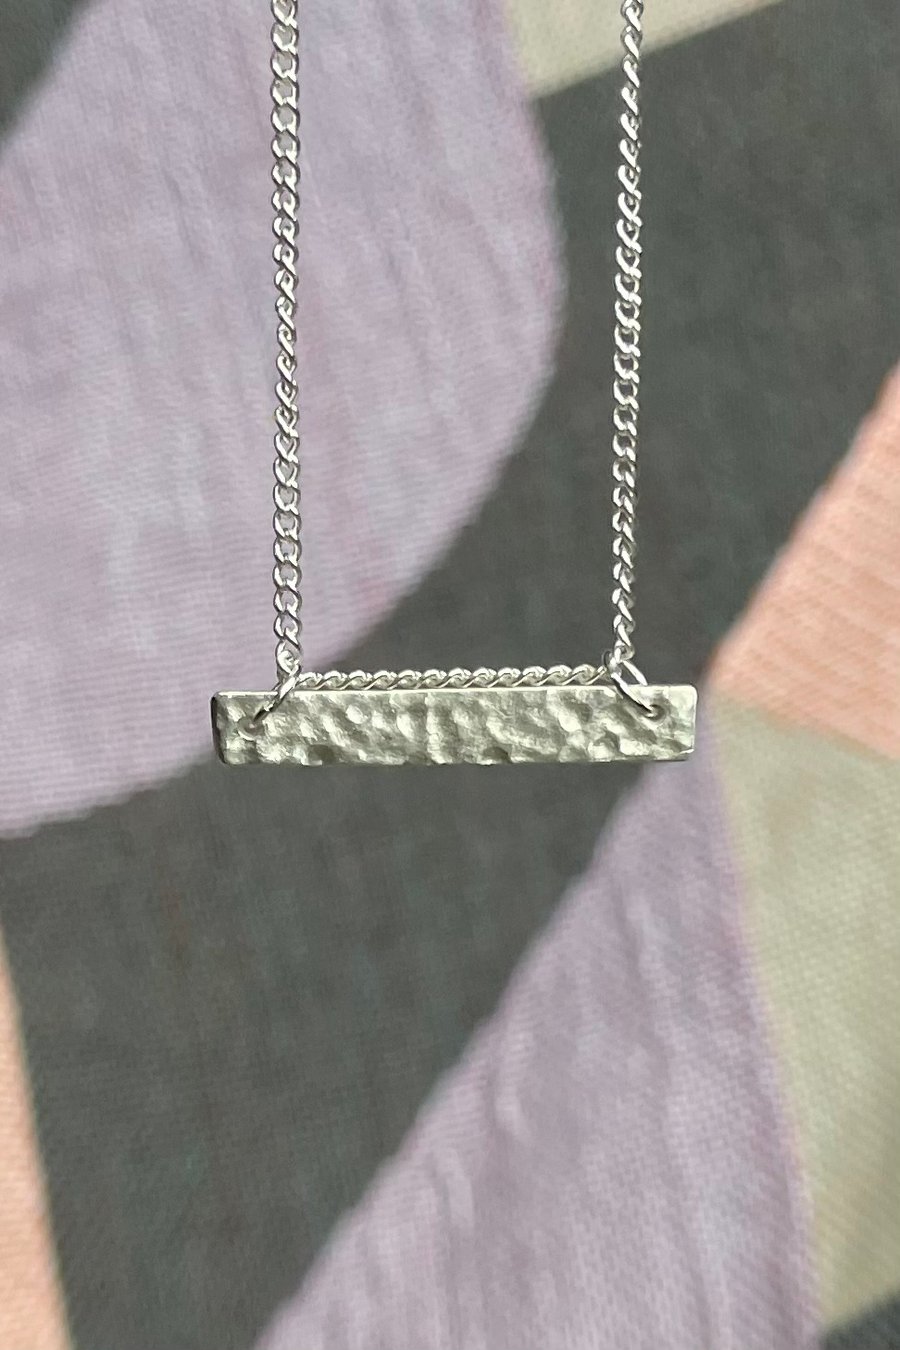 Silver bar necklace, handmade 999 fine silver hammered pendant